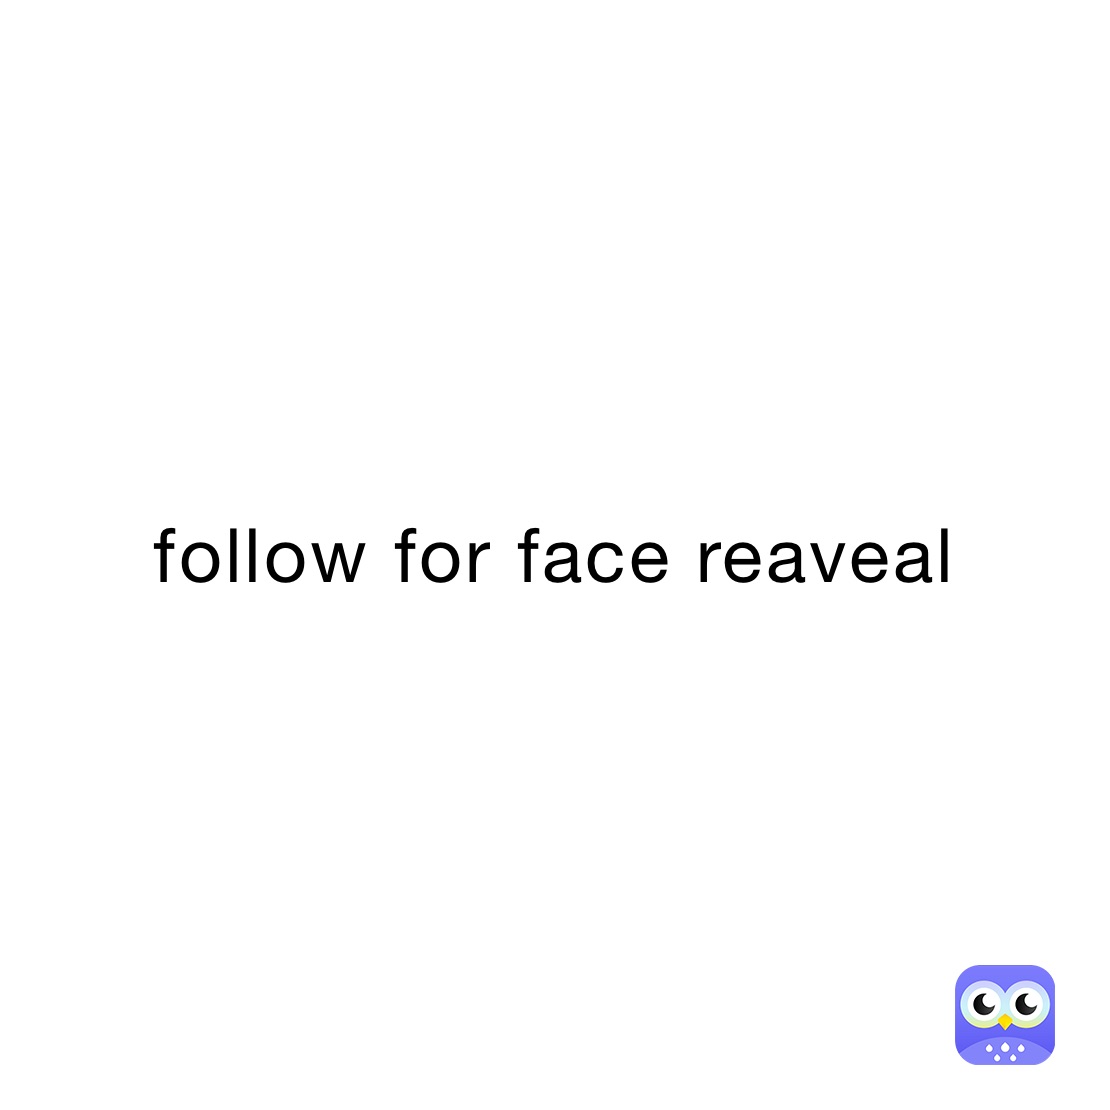 follow for face reaveal